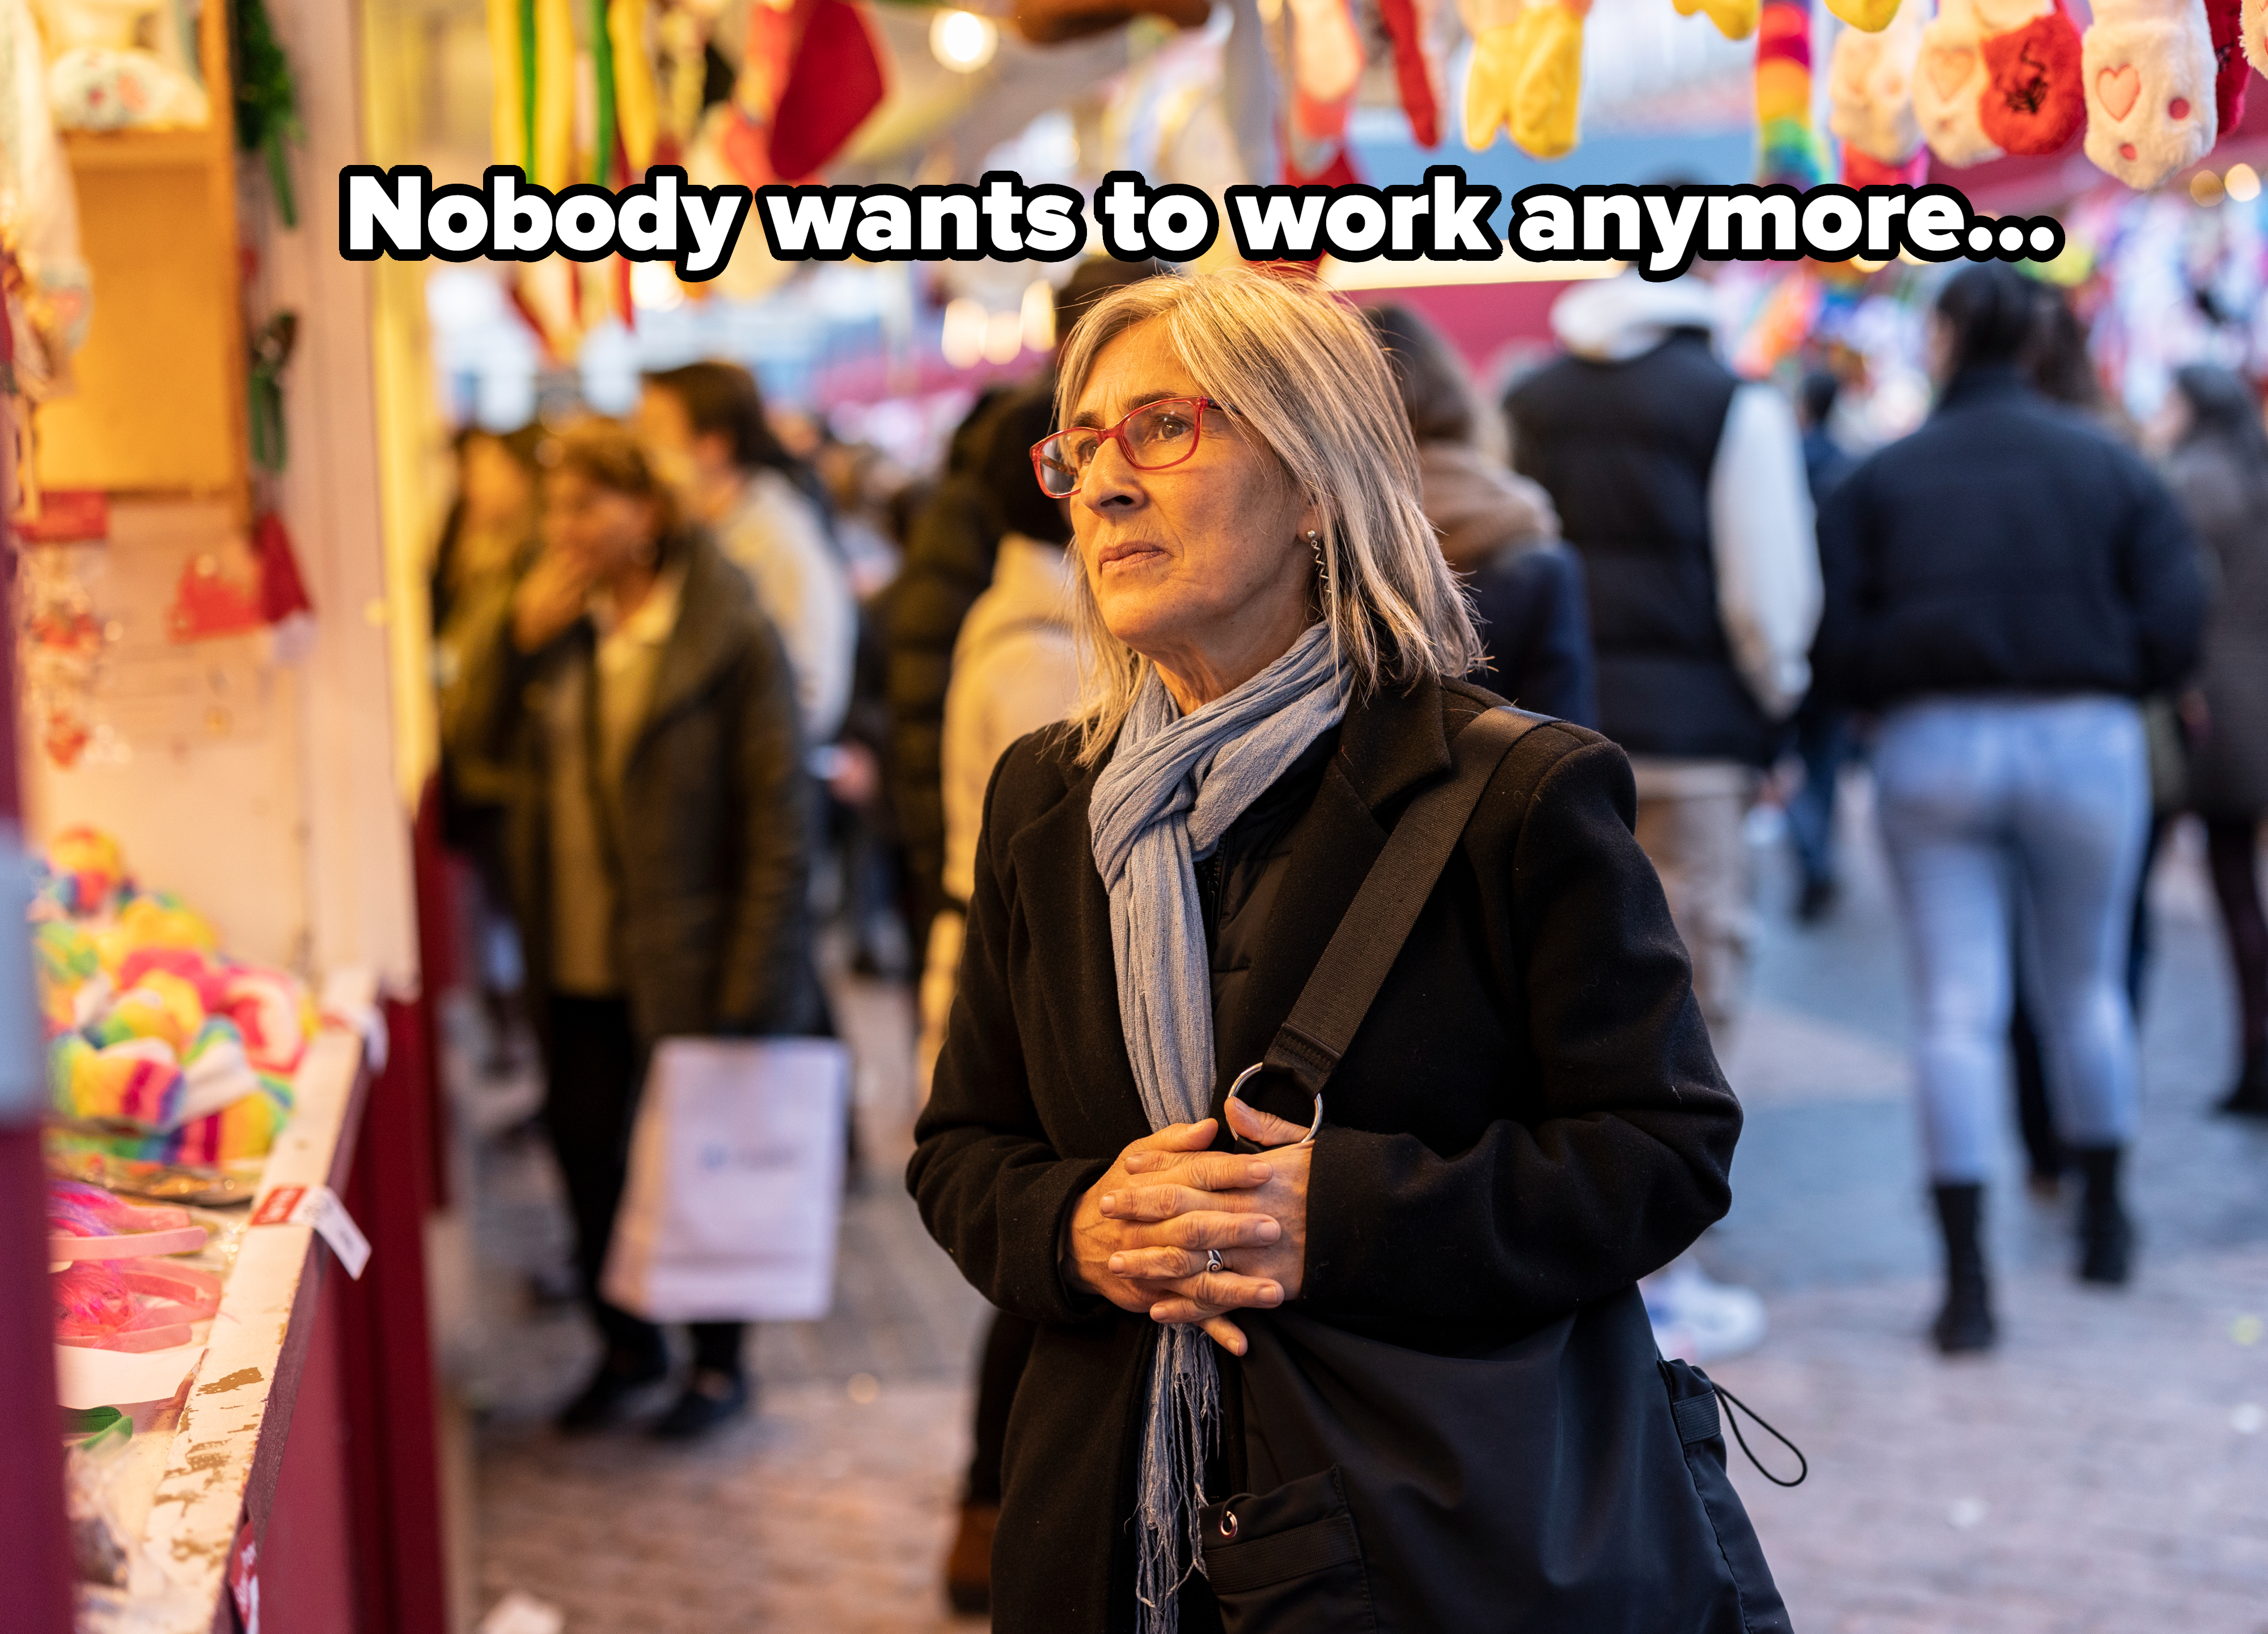 &quot;Nobody wants to work anymore...&quot;